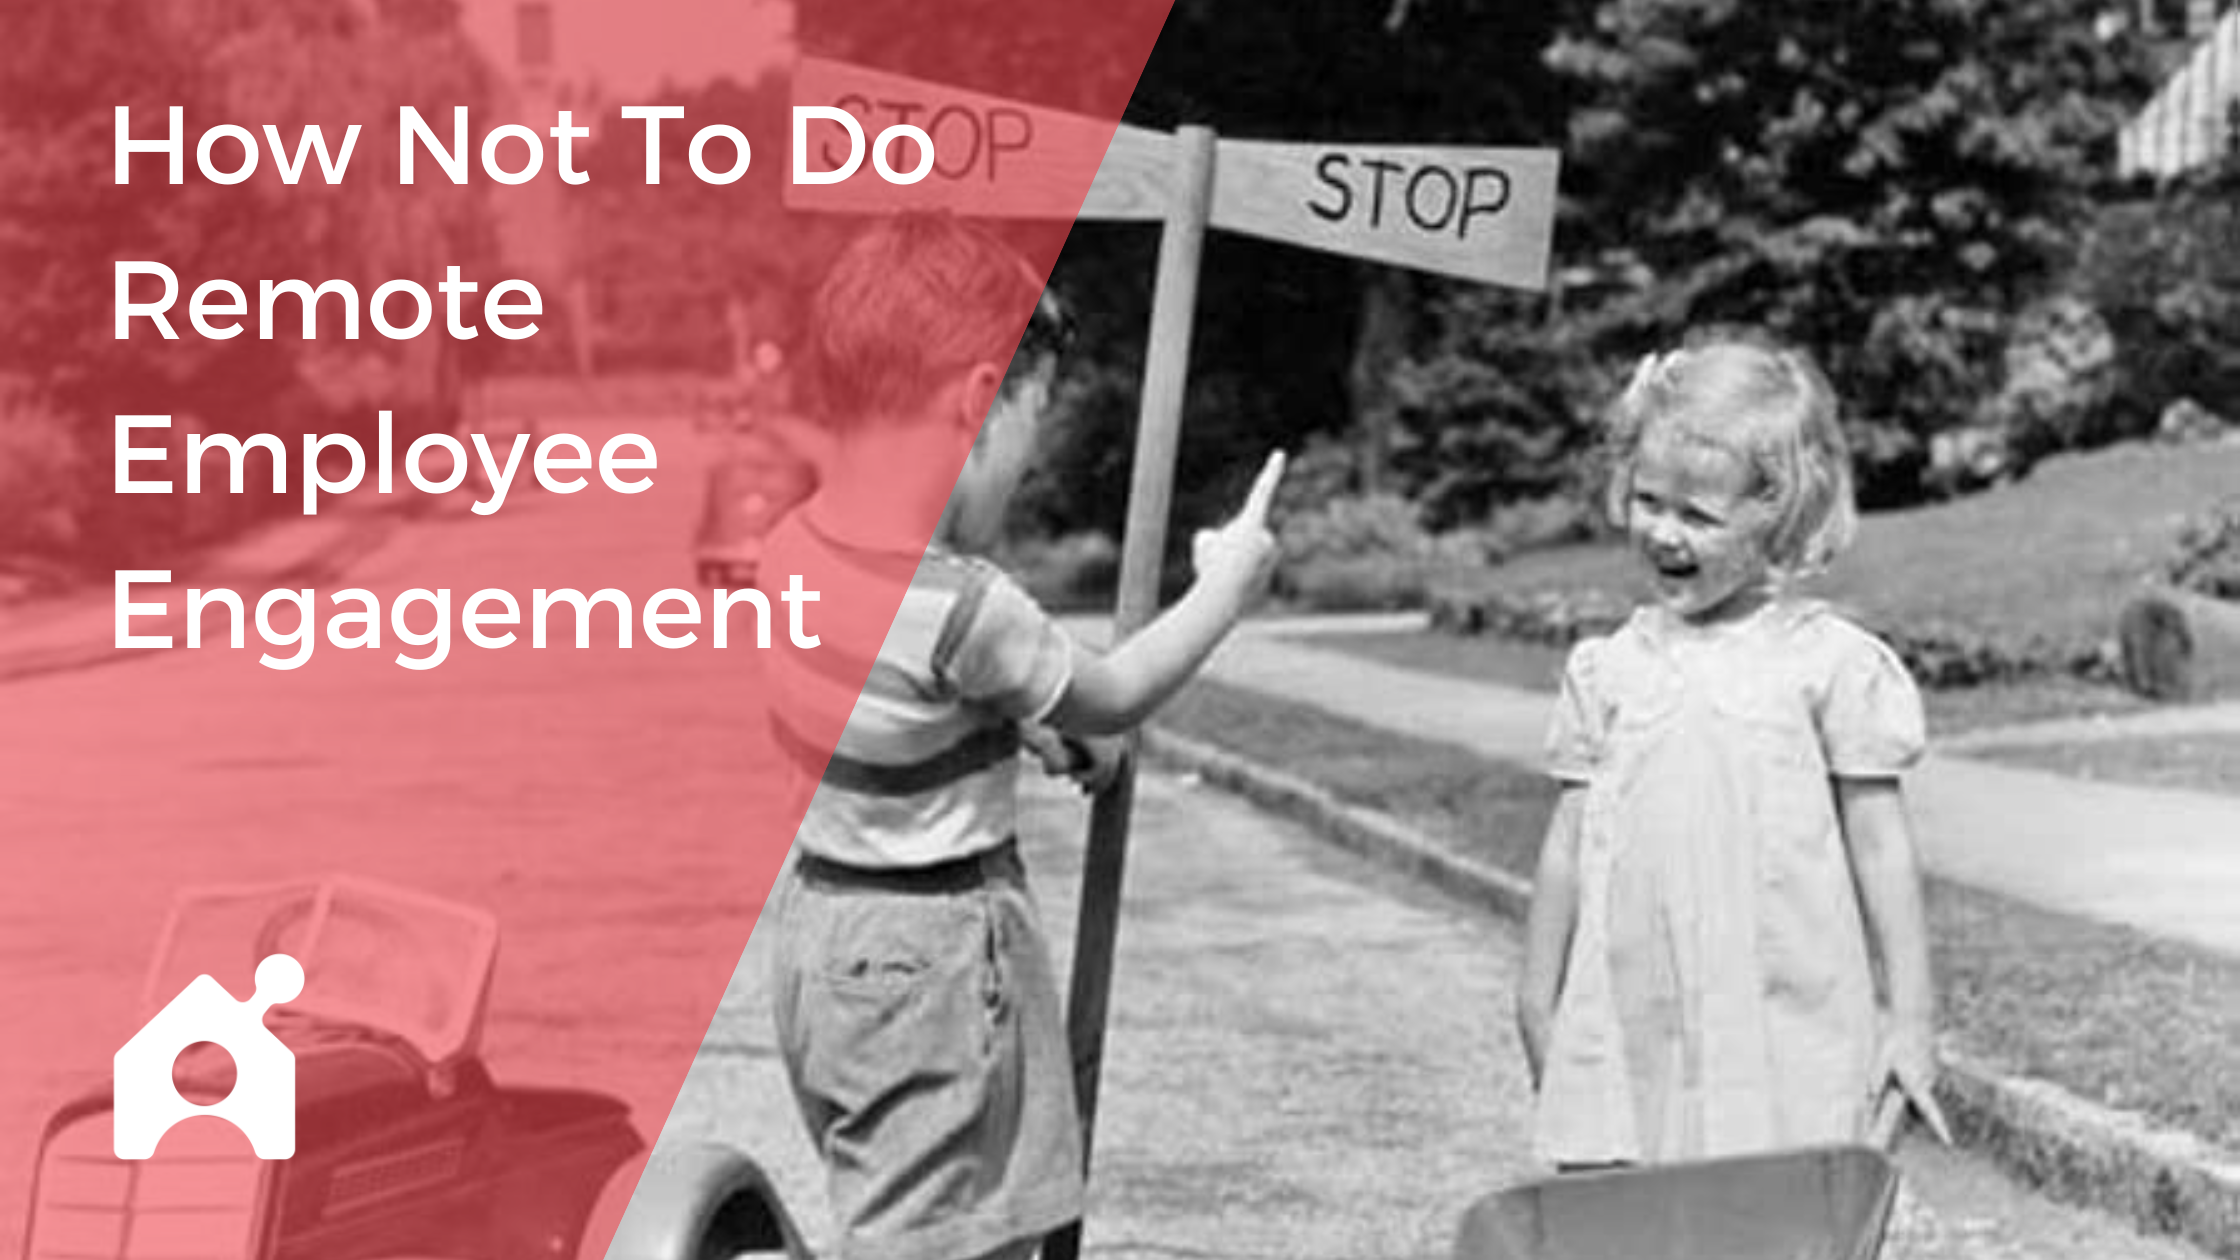 How not to do remote employee engagement